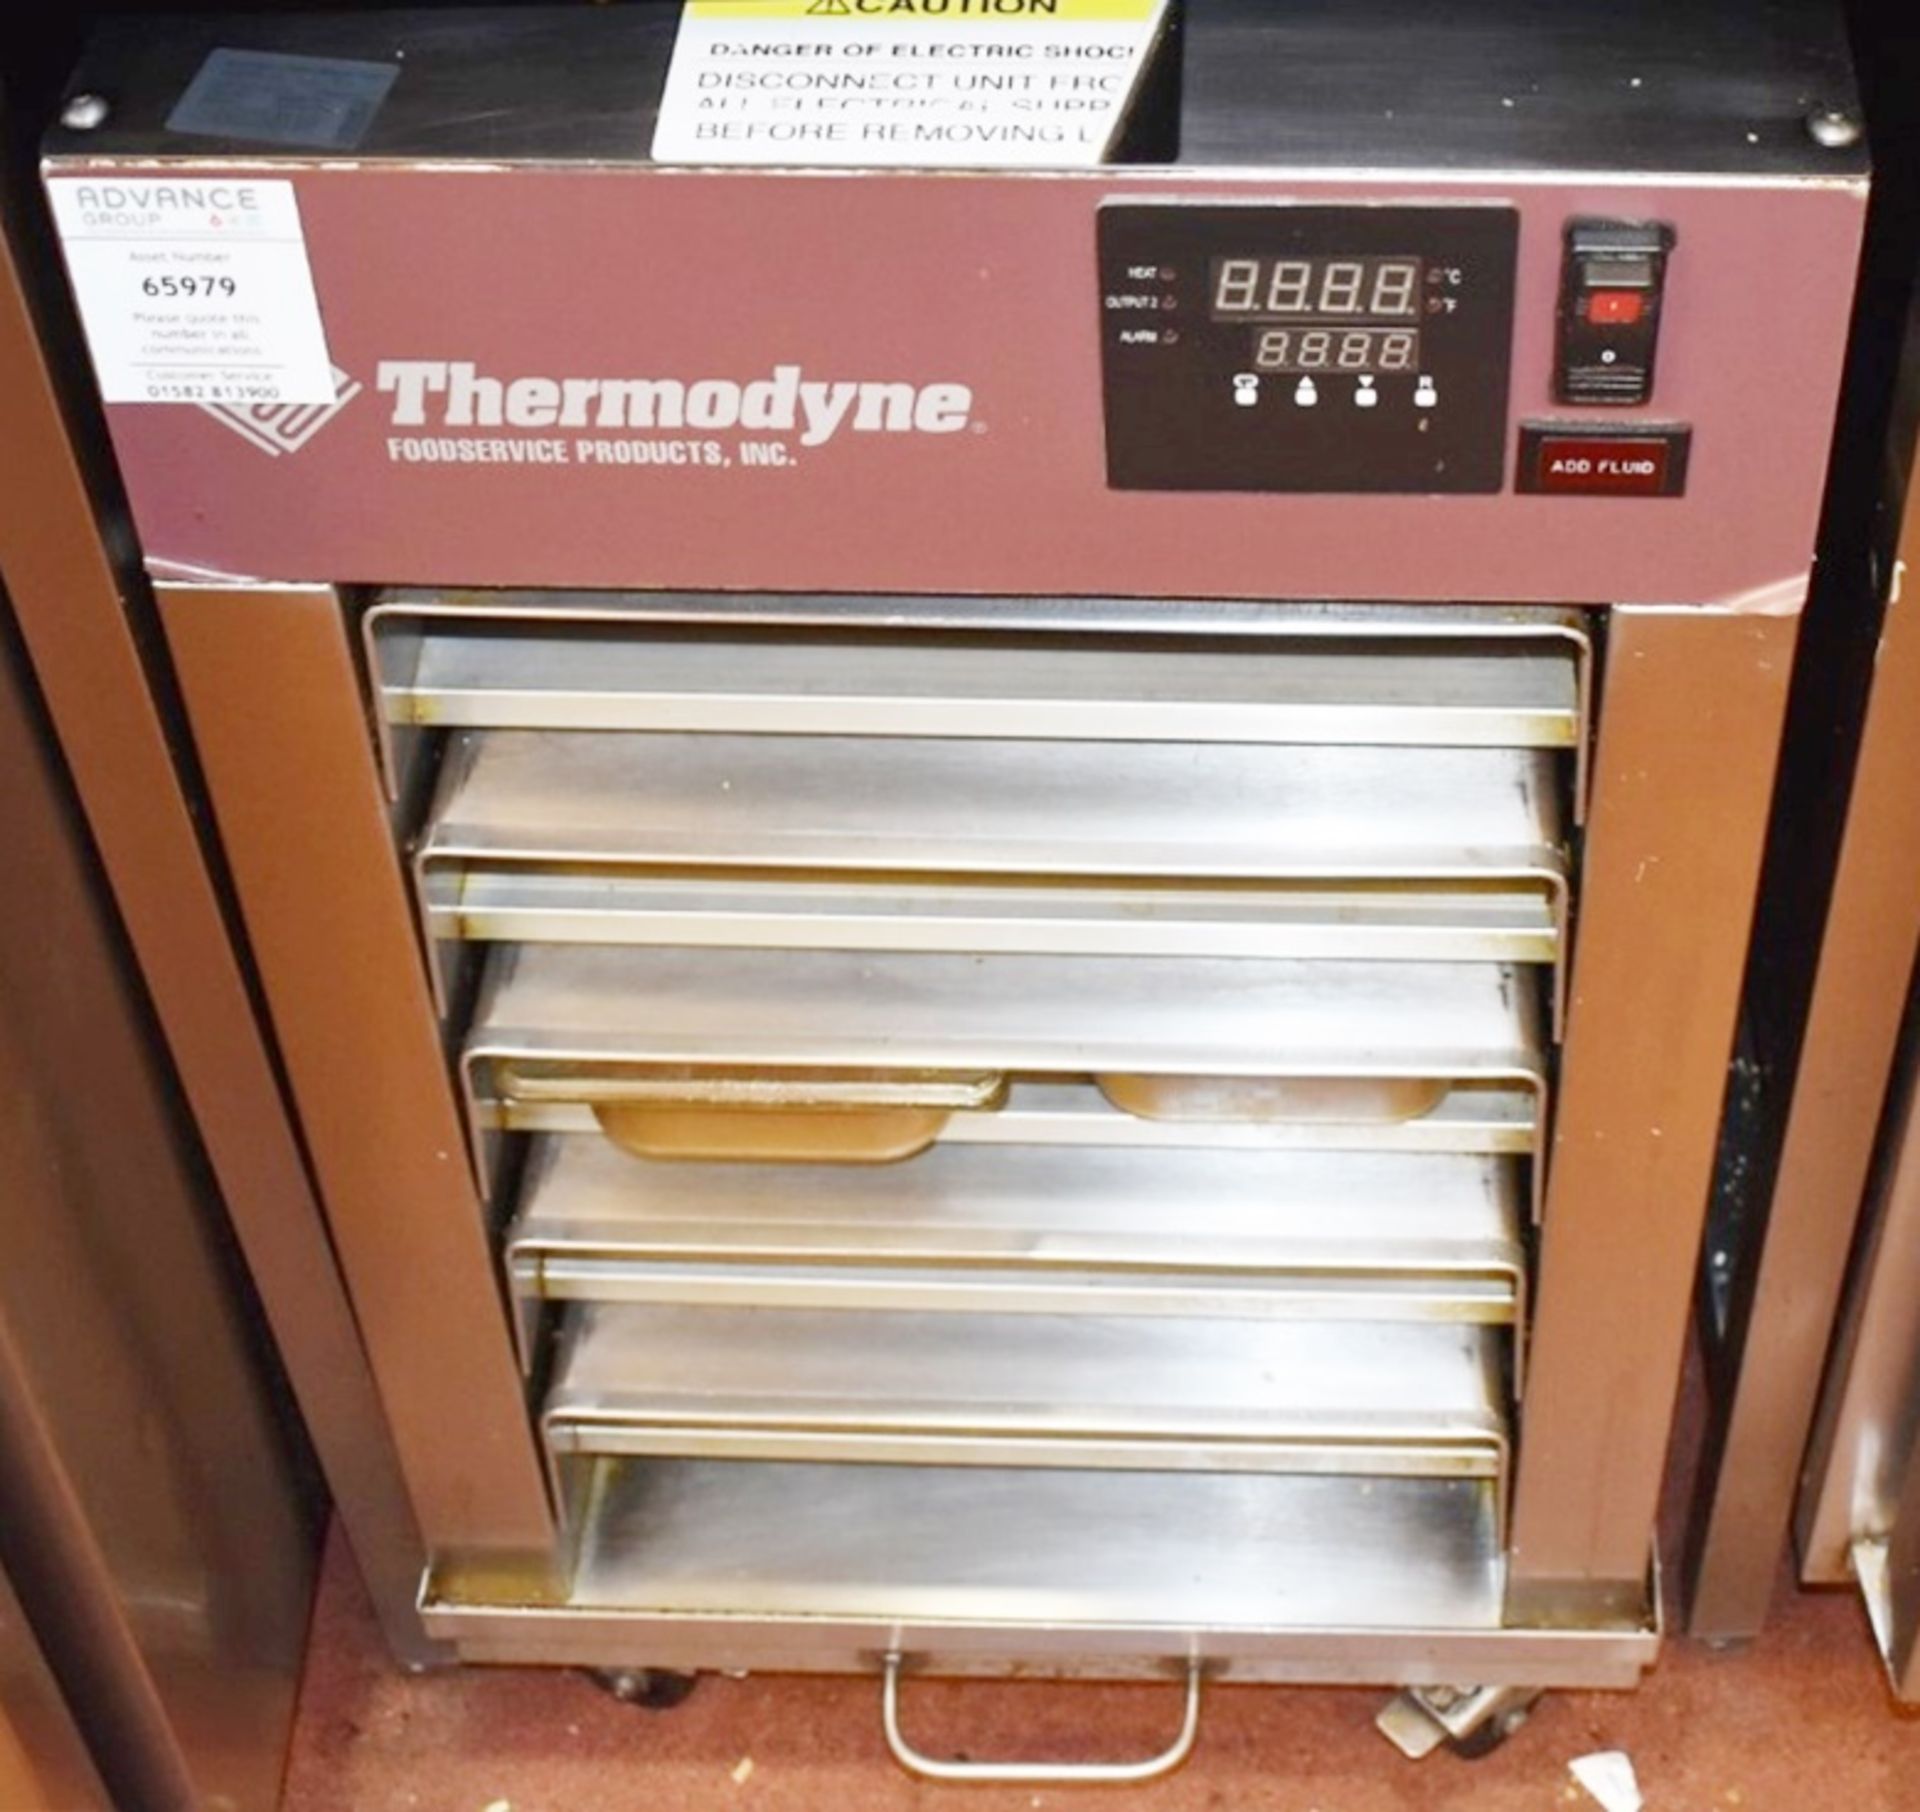 1 x Thermodyne Cook and Hold Food Warmer With Stainless Steel Prep Bench - H77 x W50 x D66 cms - Ref